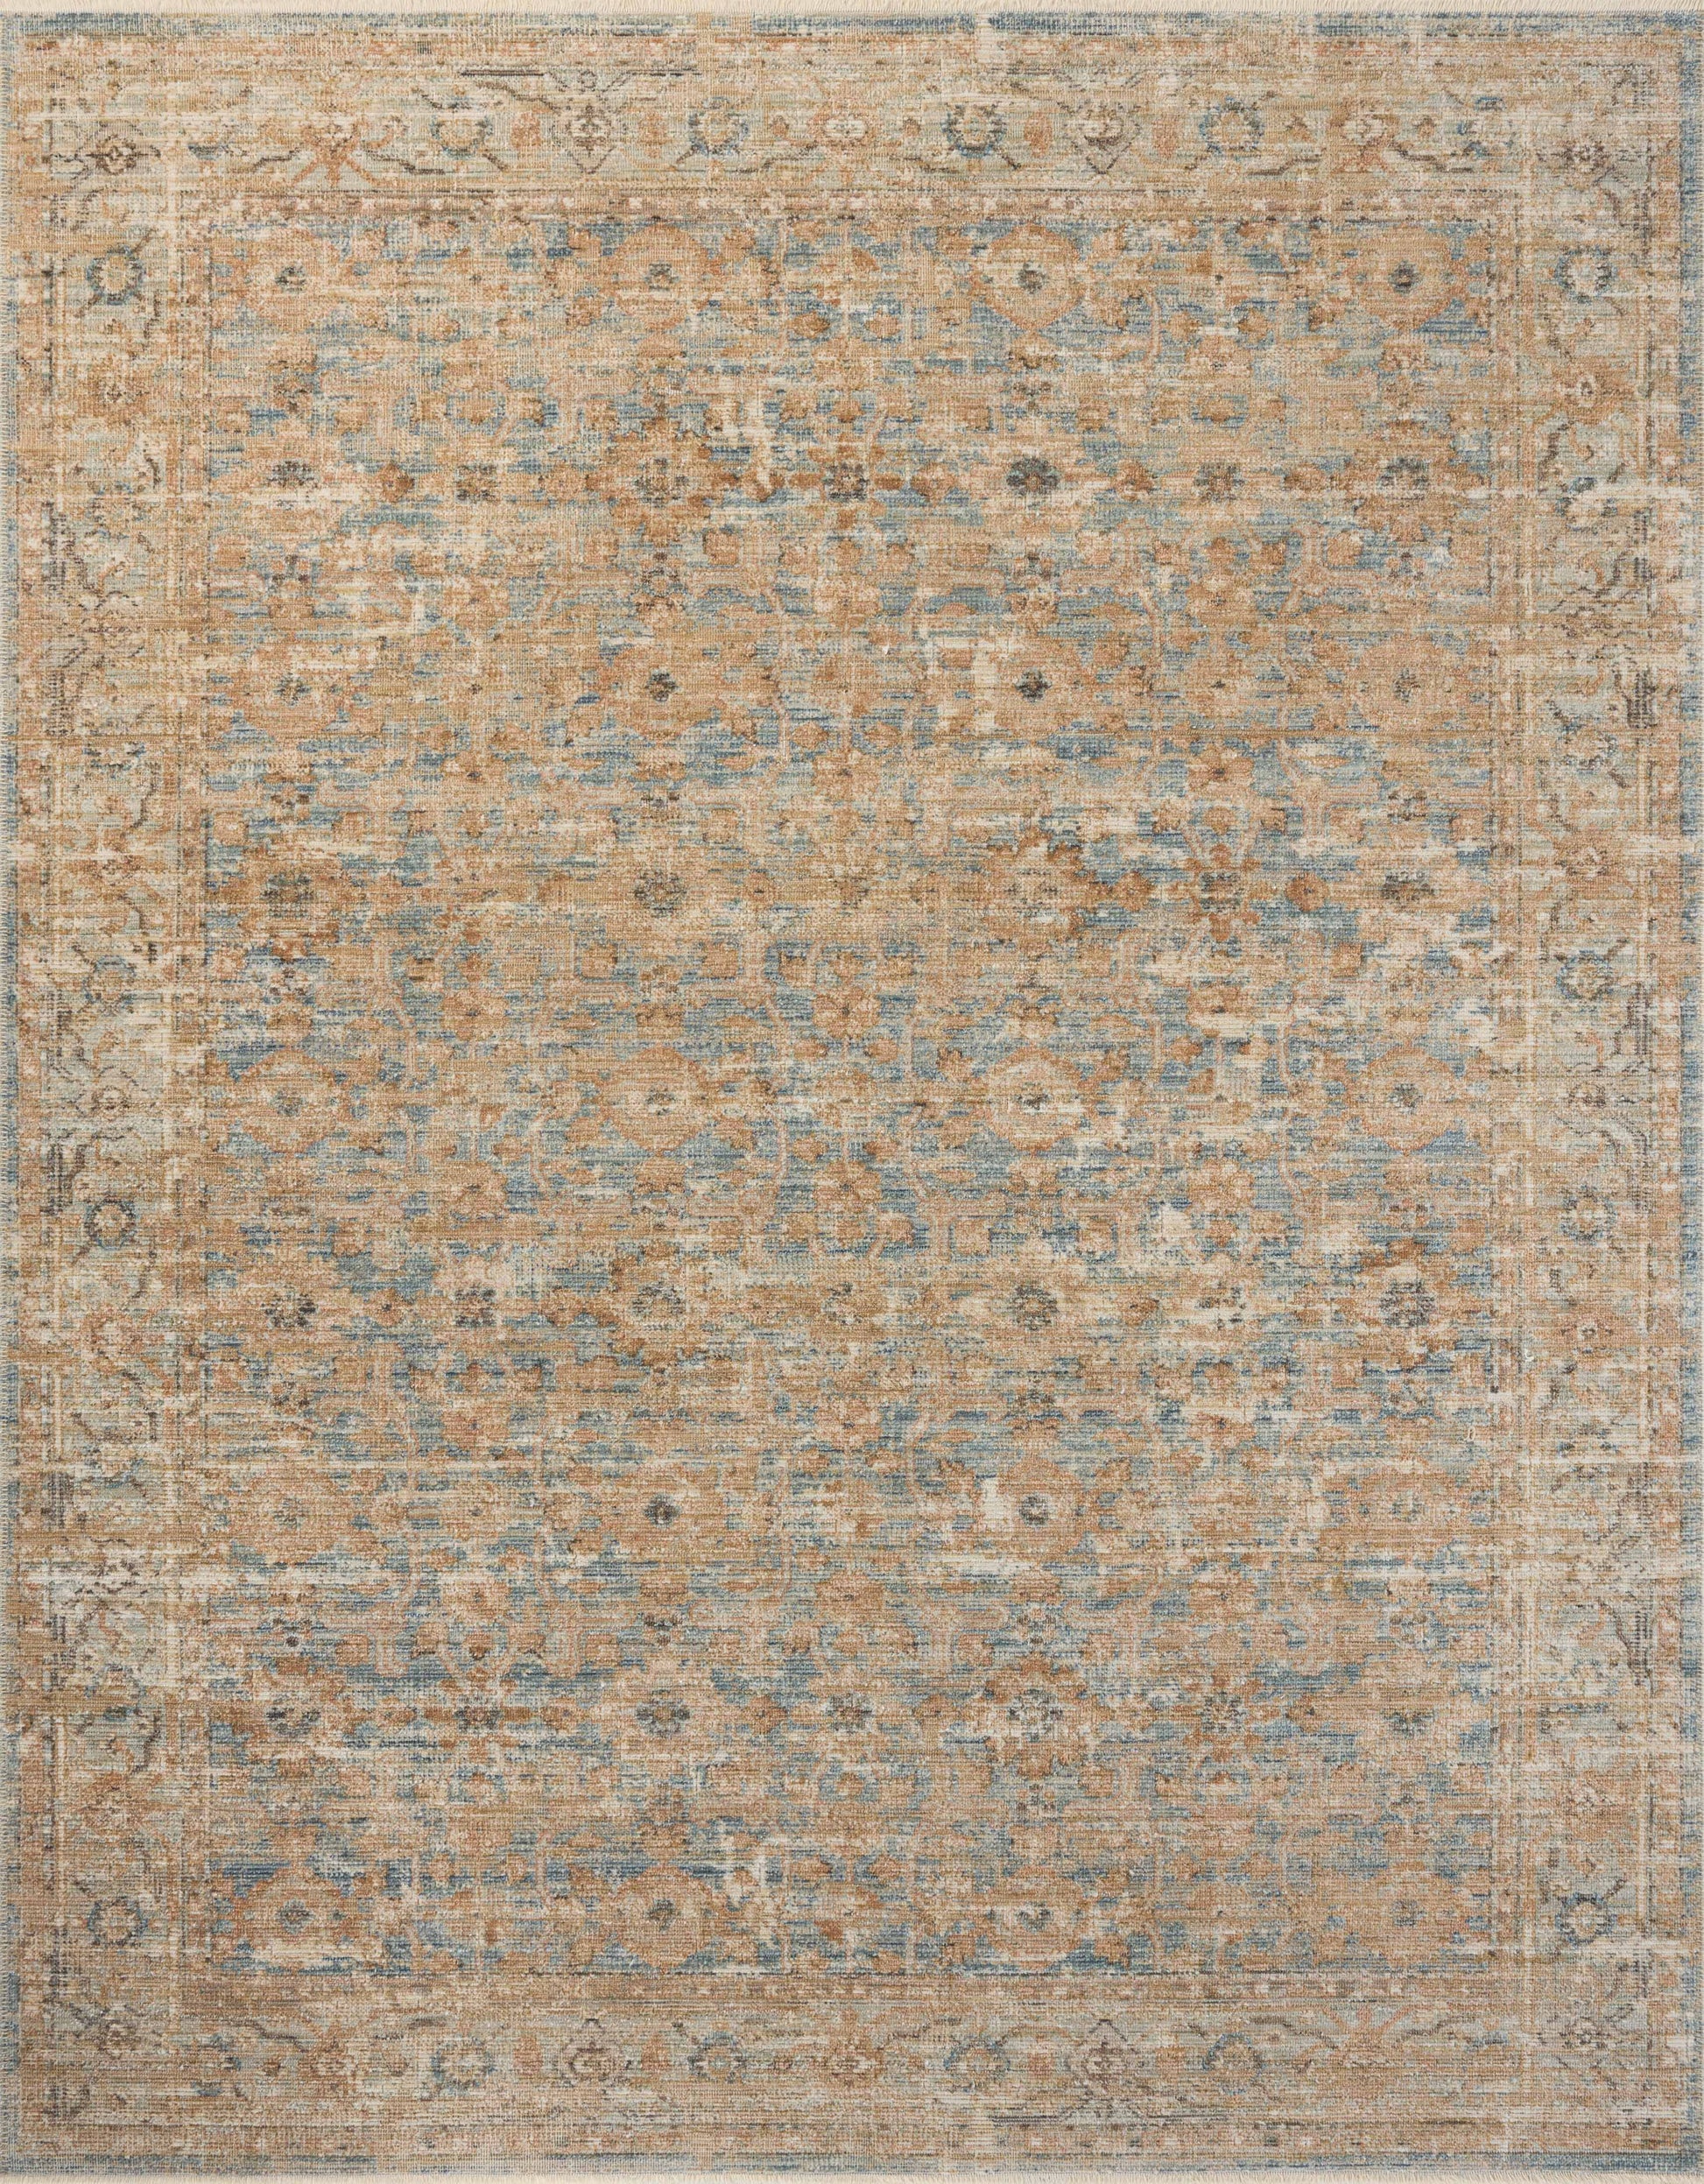 A picture of Loloi's Heritage rug, in style HER-15, color Ocean / Sand